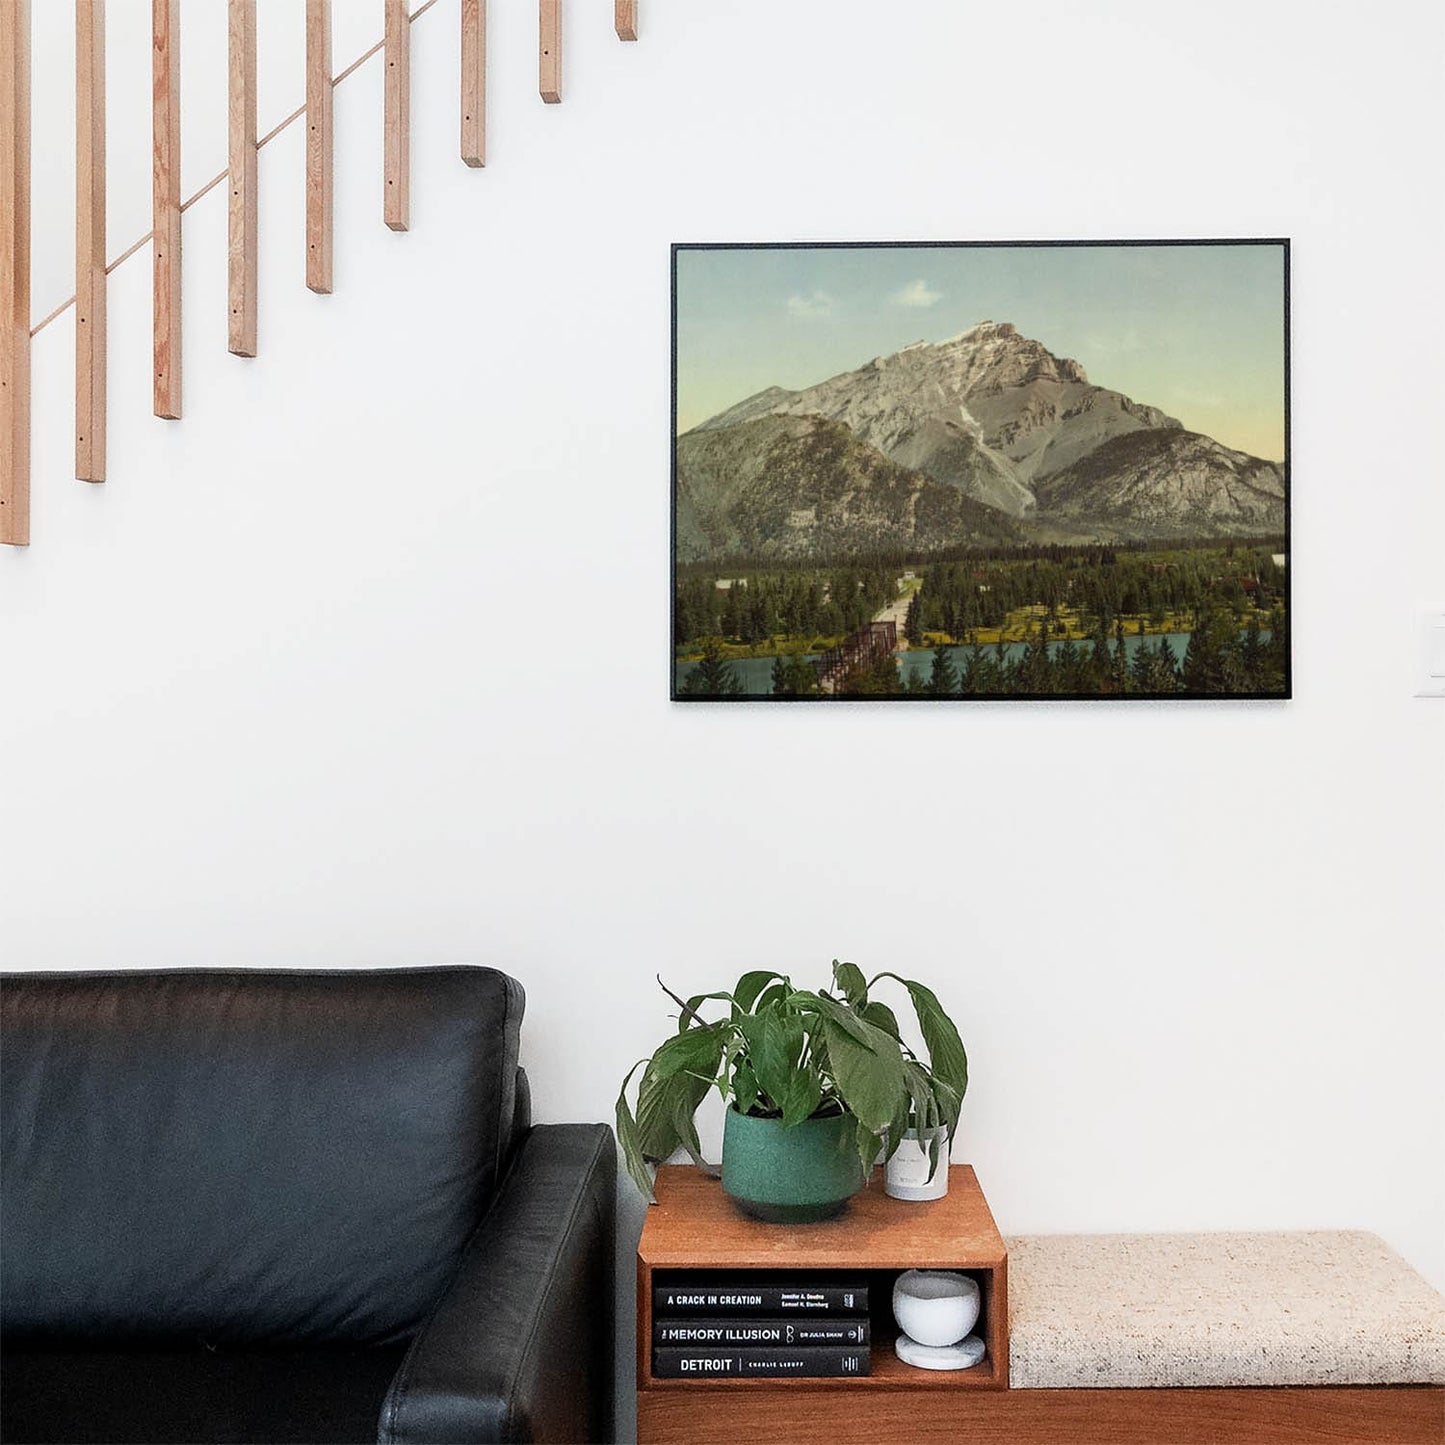 Living space with a black leather couch and table with a plant and books below a staircase featuring a framed picture of Vintage Mountains